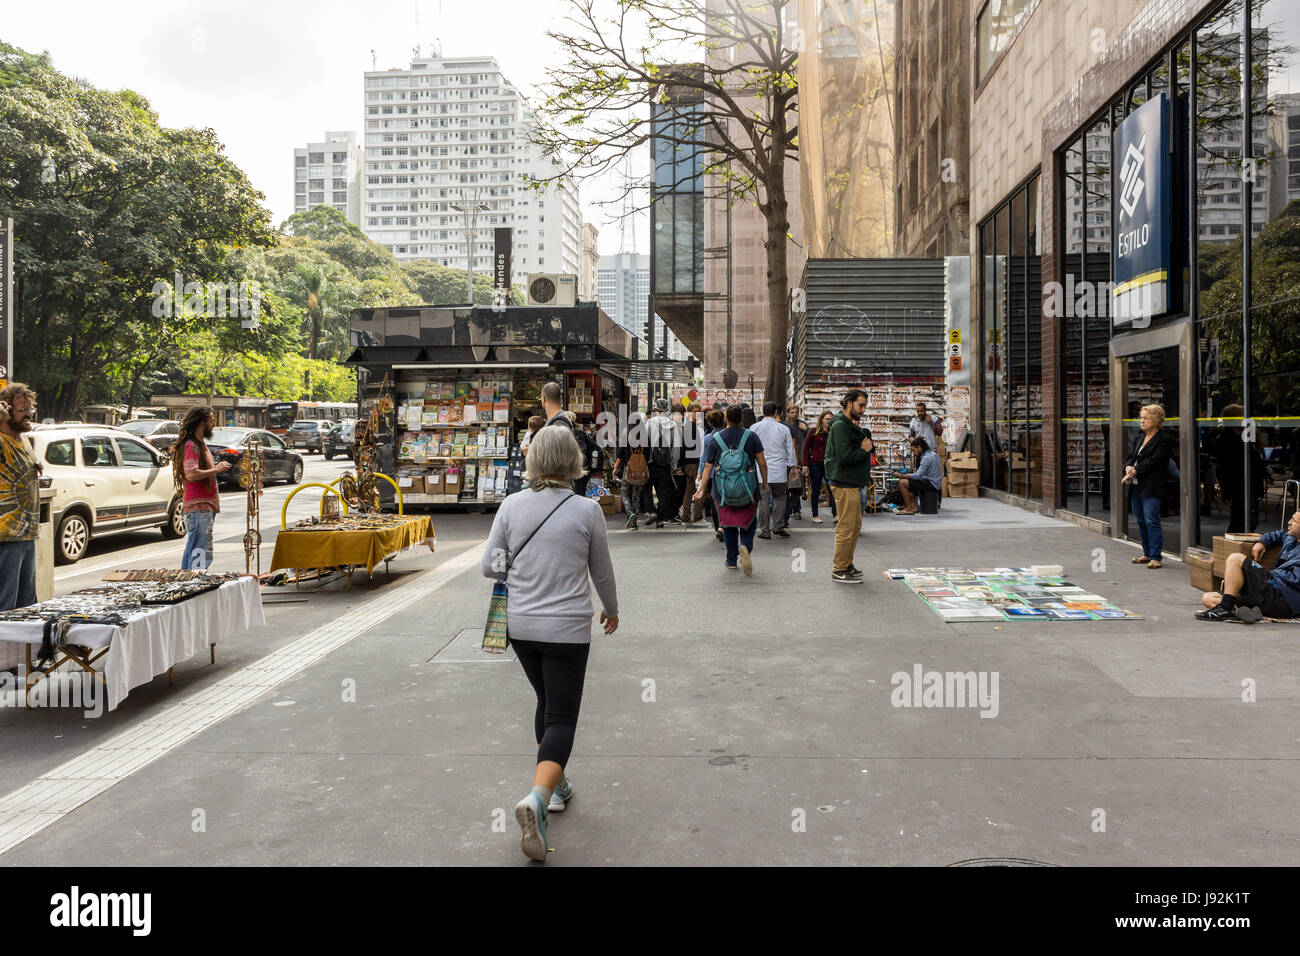 Brazil, Sao Paulo - May 14, 2016: View of Avenida Paulista in the center of Sao Paulo city with its commercial buildings and cars passing by Stock Photo